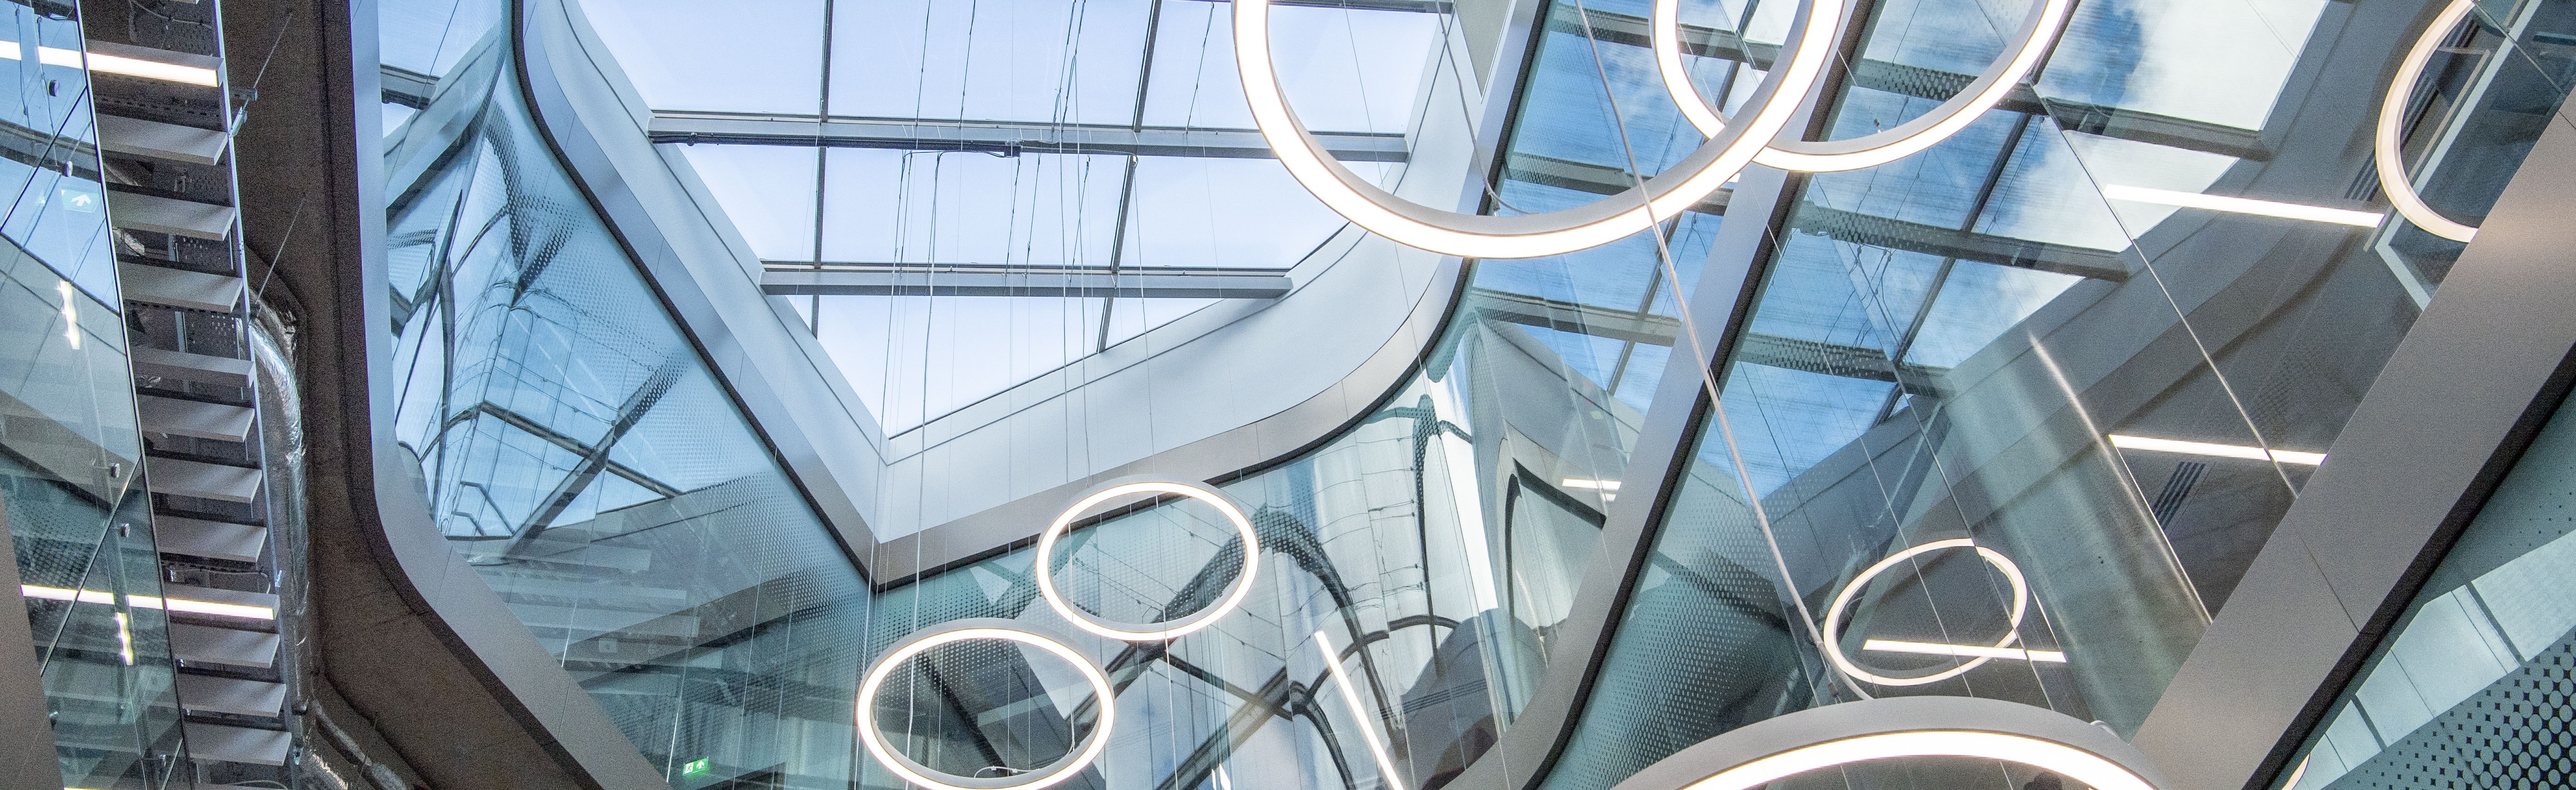 image of the lights in the lobby of the Advanced Research Centre building